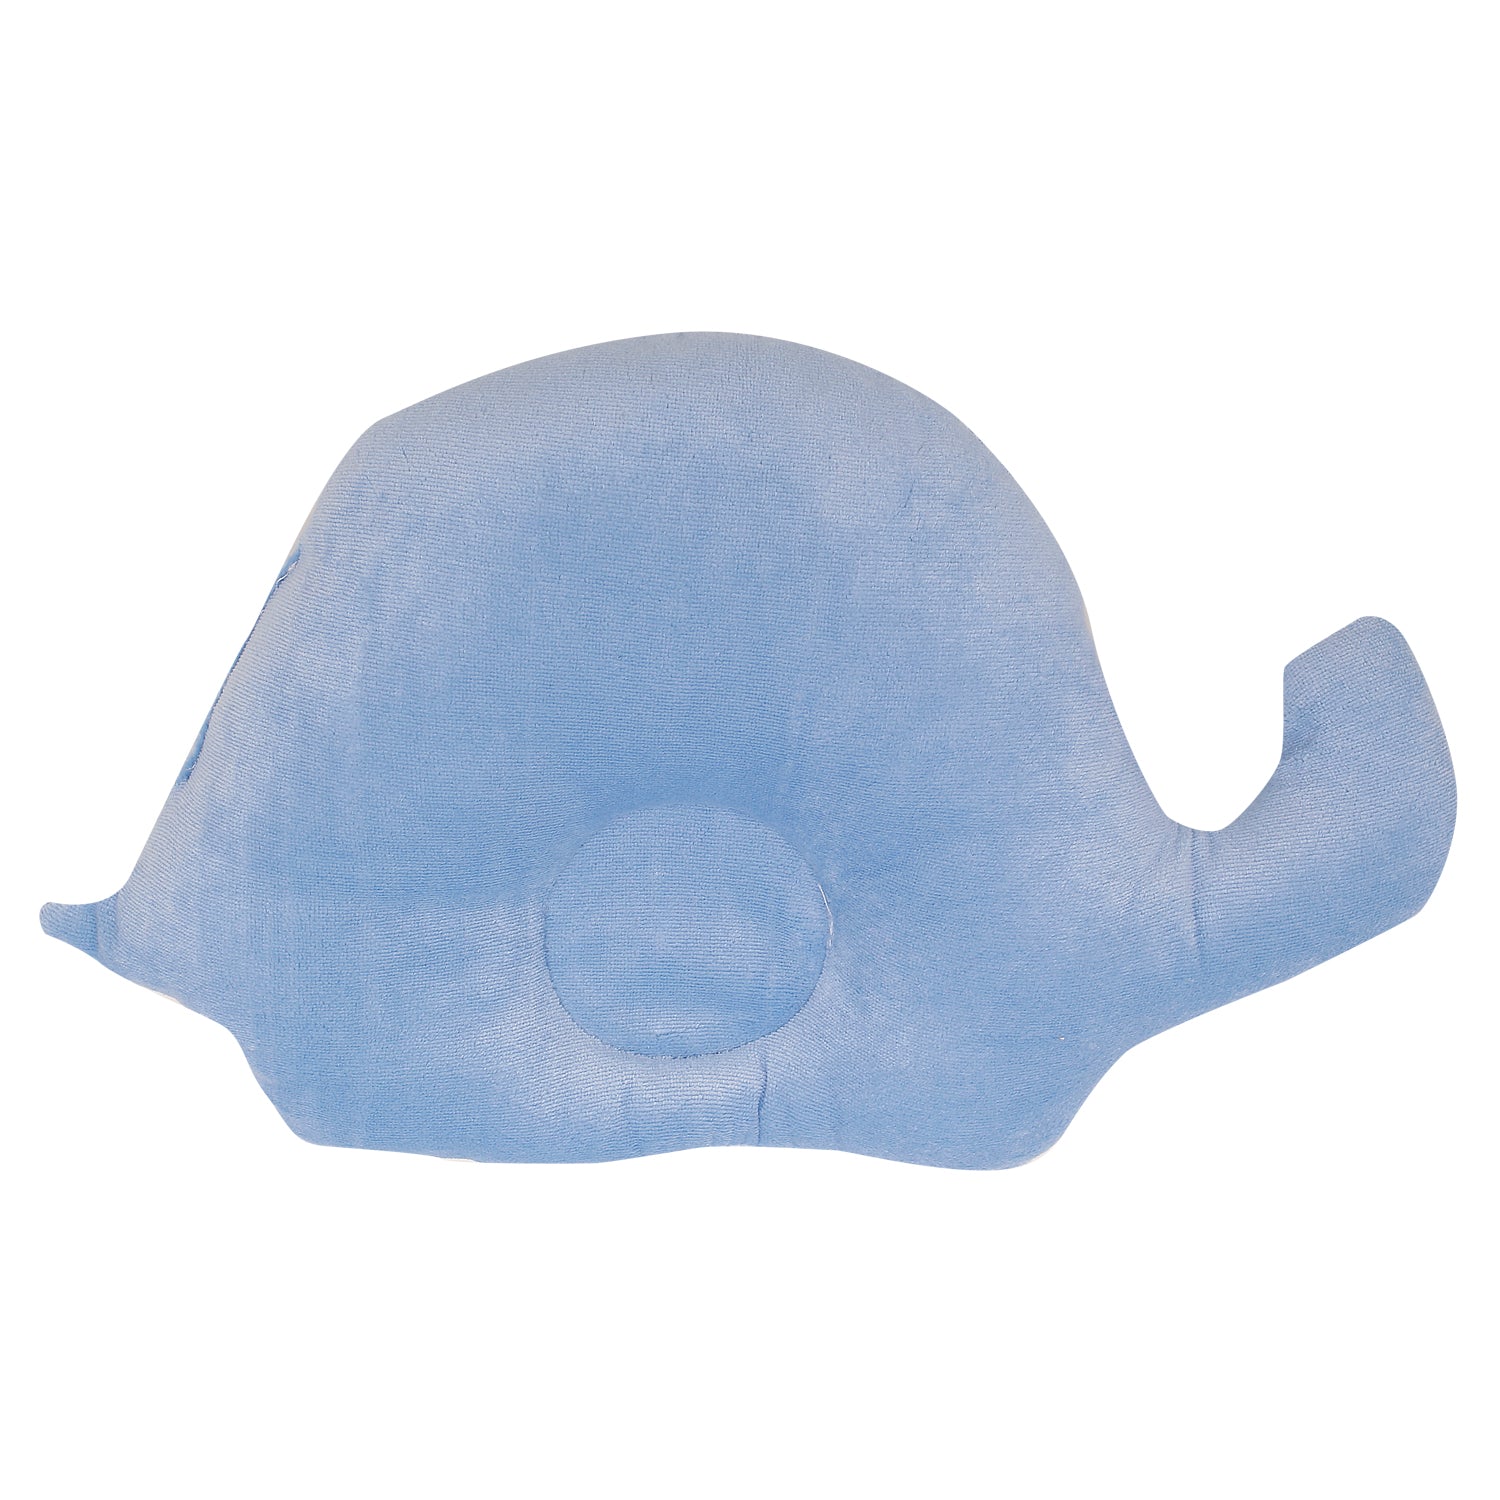 Elephant Shaped Blue Baby Pillow - Baby Moo